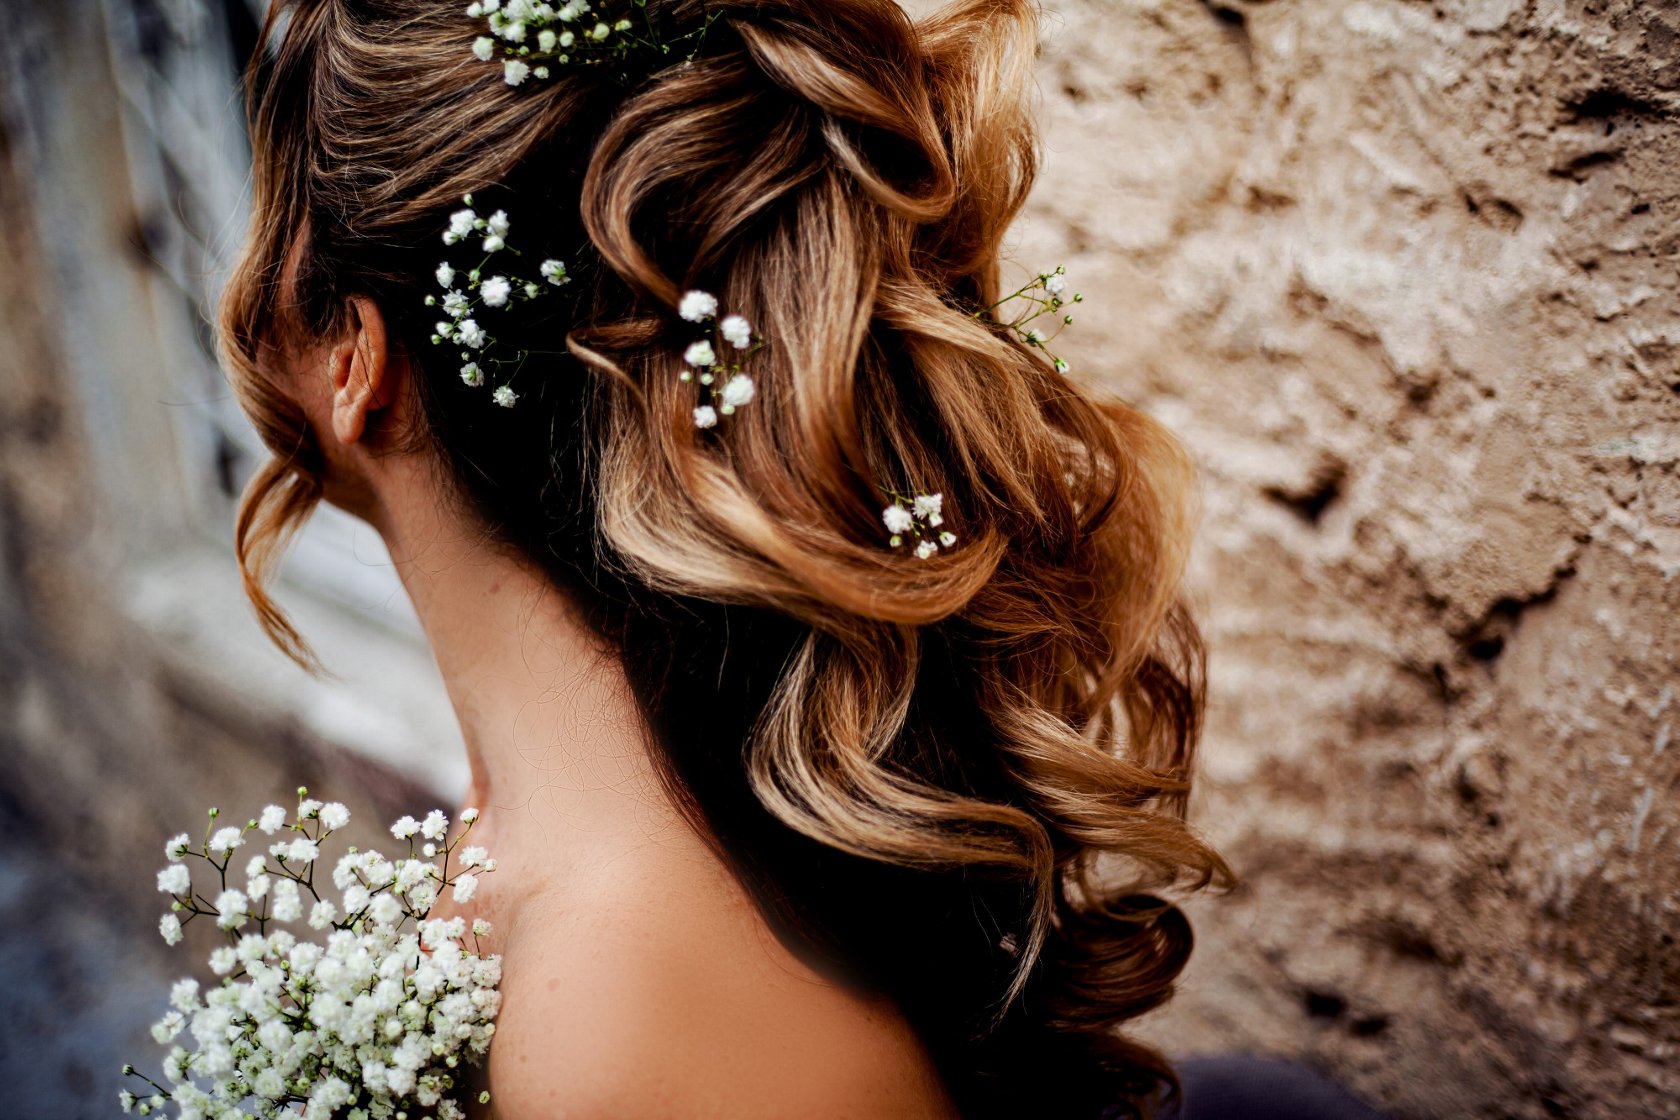 20 Summer Wedding Hairstyles to Keep You Cool & Chic